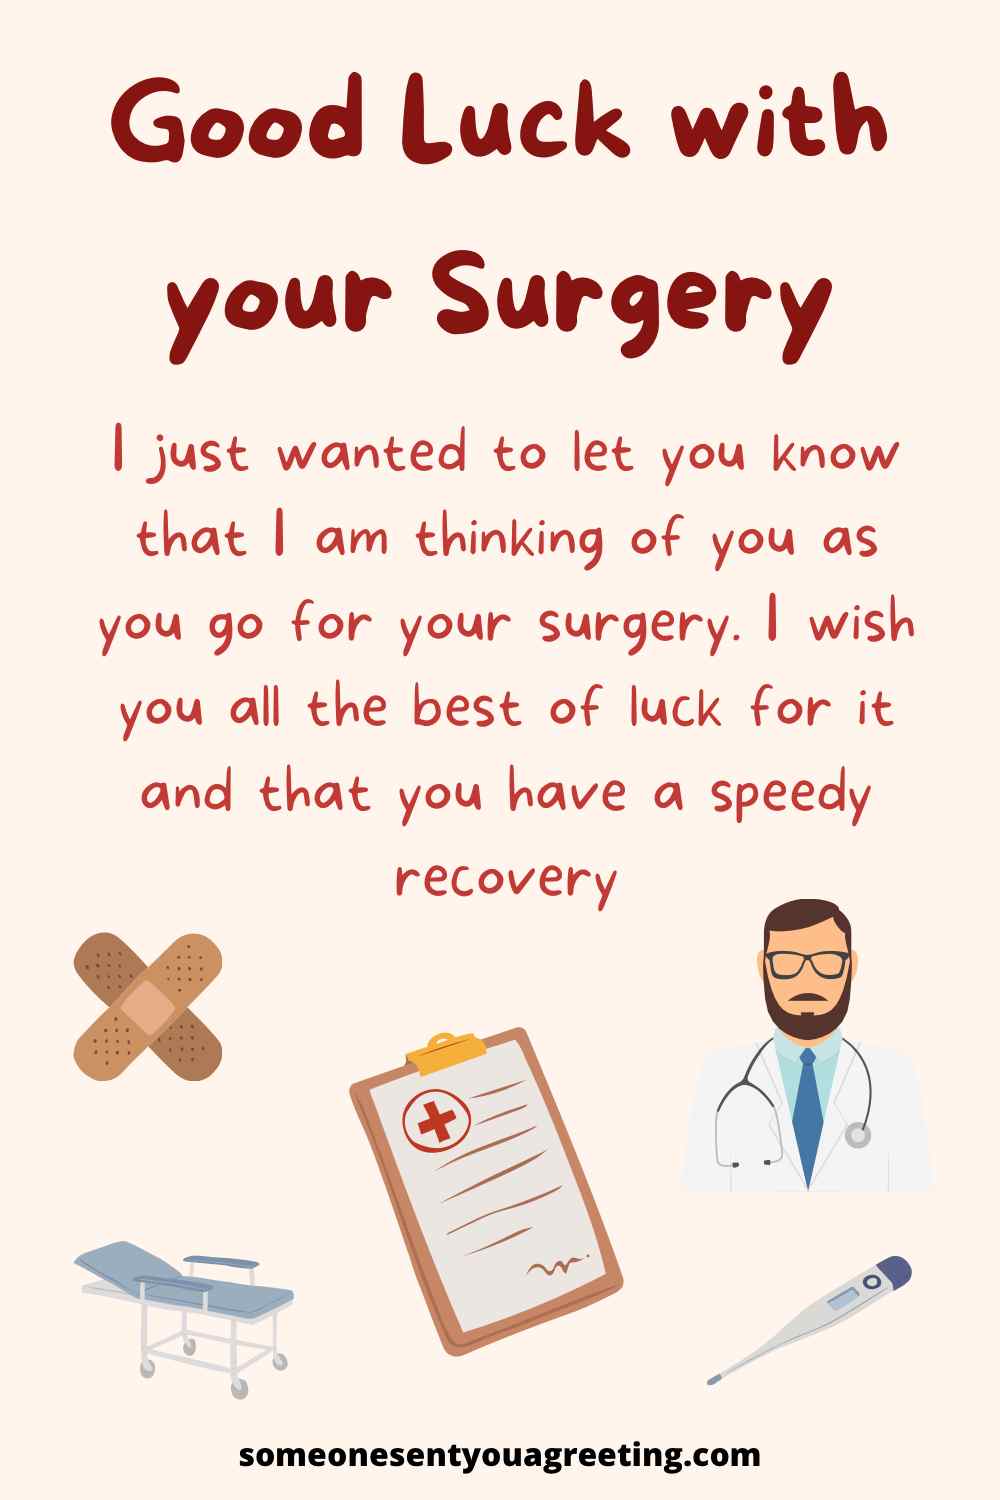 I hope your surgery goes well message